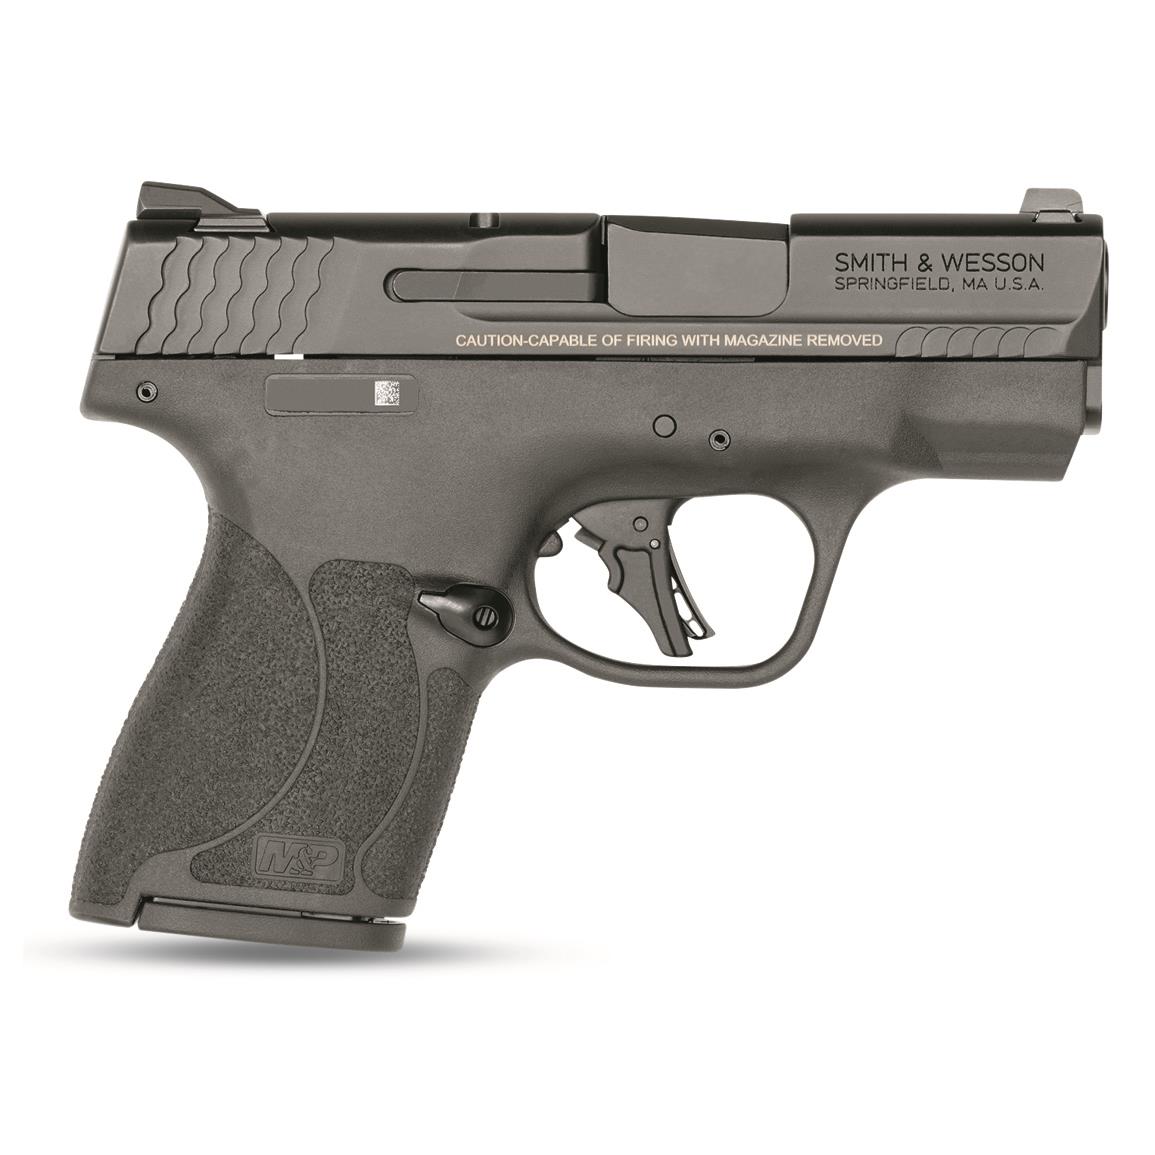 Smith & Wesson M&P Shield Plus, Semi-automatic, 9mm, 3.1" BBL, Man. Safety, 10-lb. Trigger, 10+1 Rds